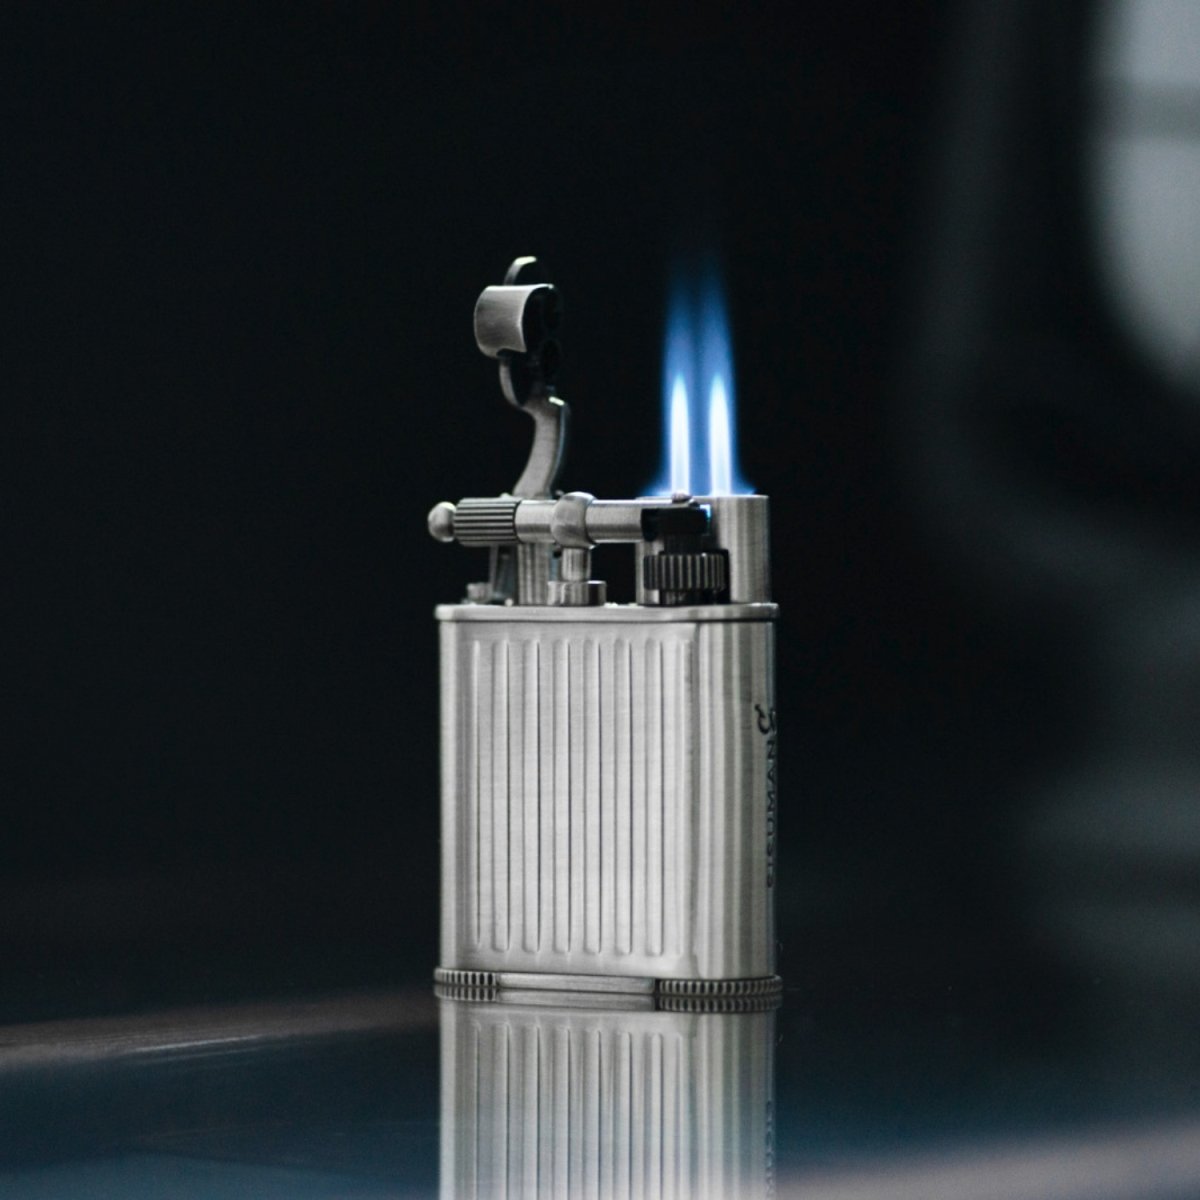 Torch Lighter, in action